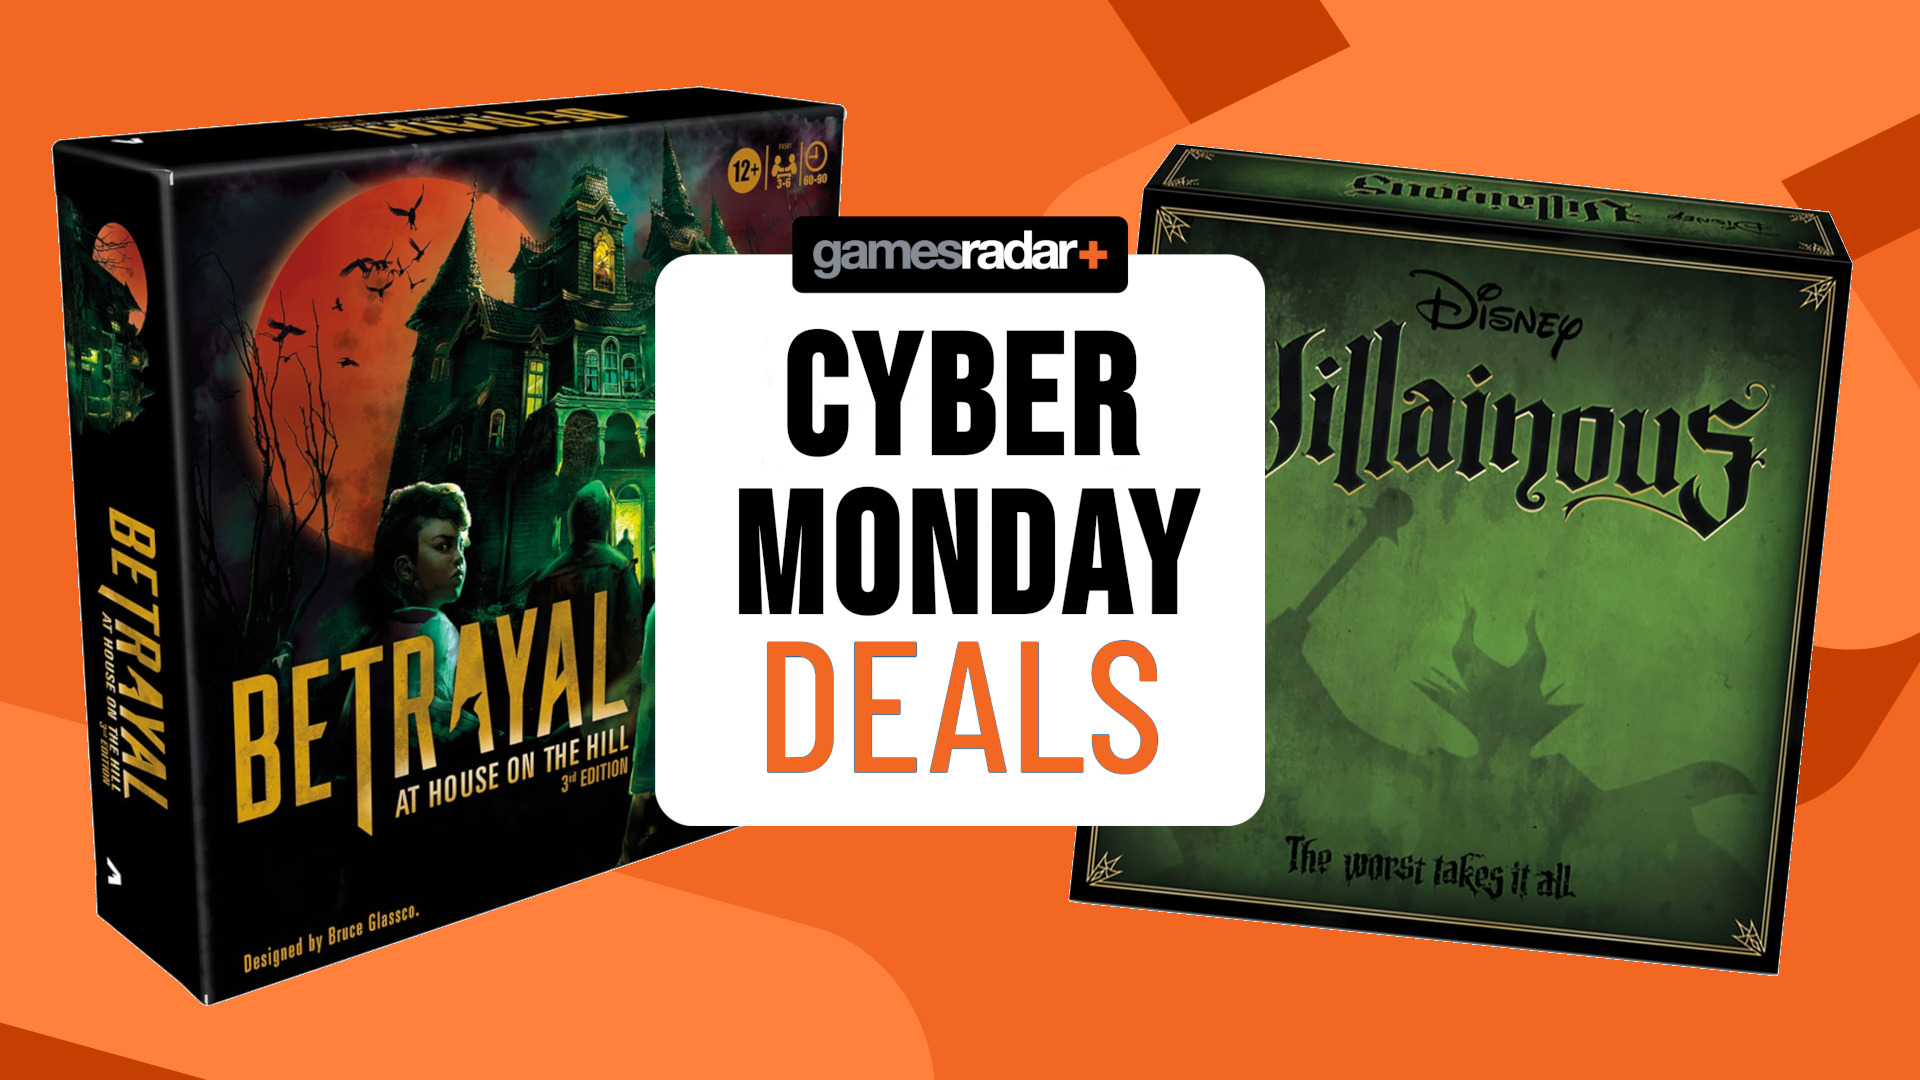 Cyber Monday board game deals live: all the best price cuts in one place